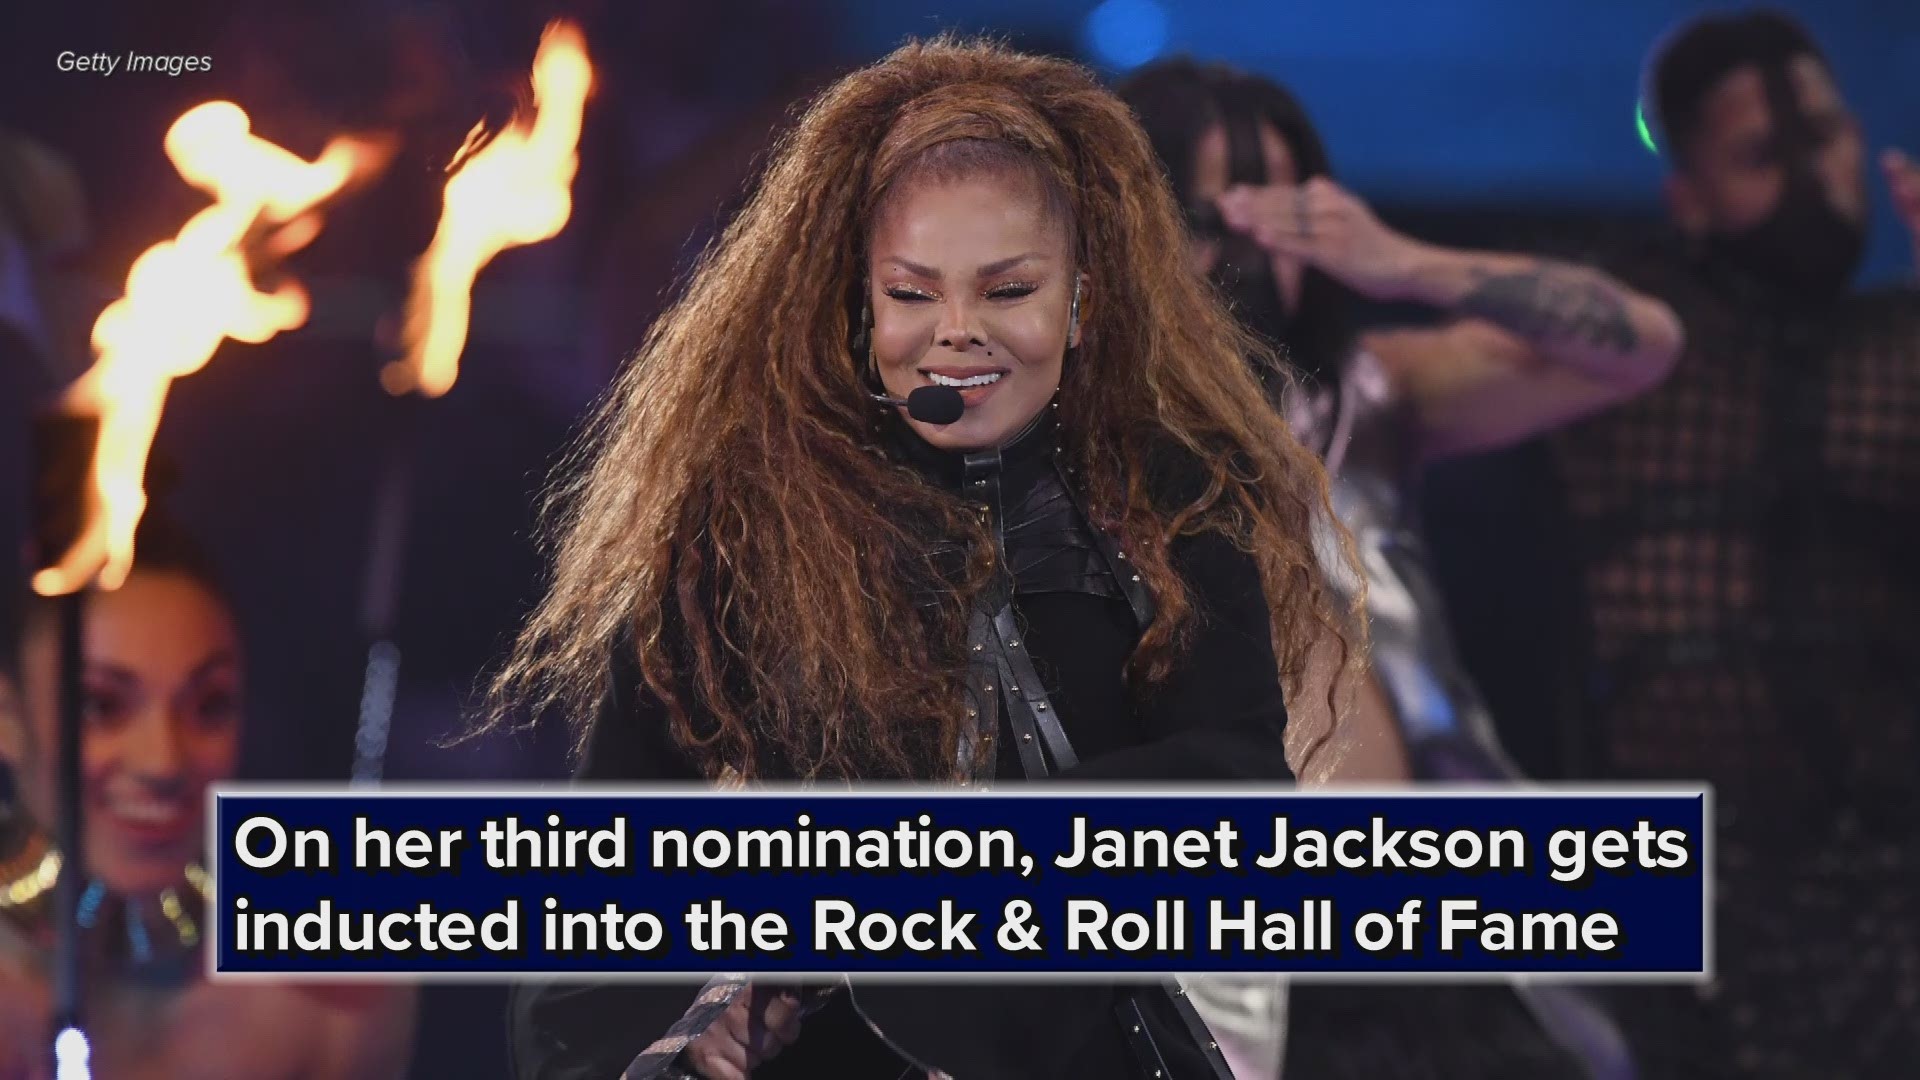 Janet Jackson joins her brother Michael and the Jackson 5 as members of the Rock & Roll Hall of Fame